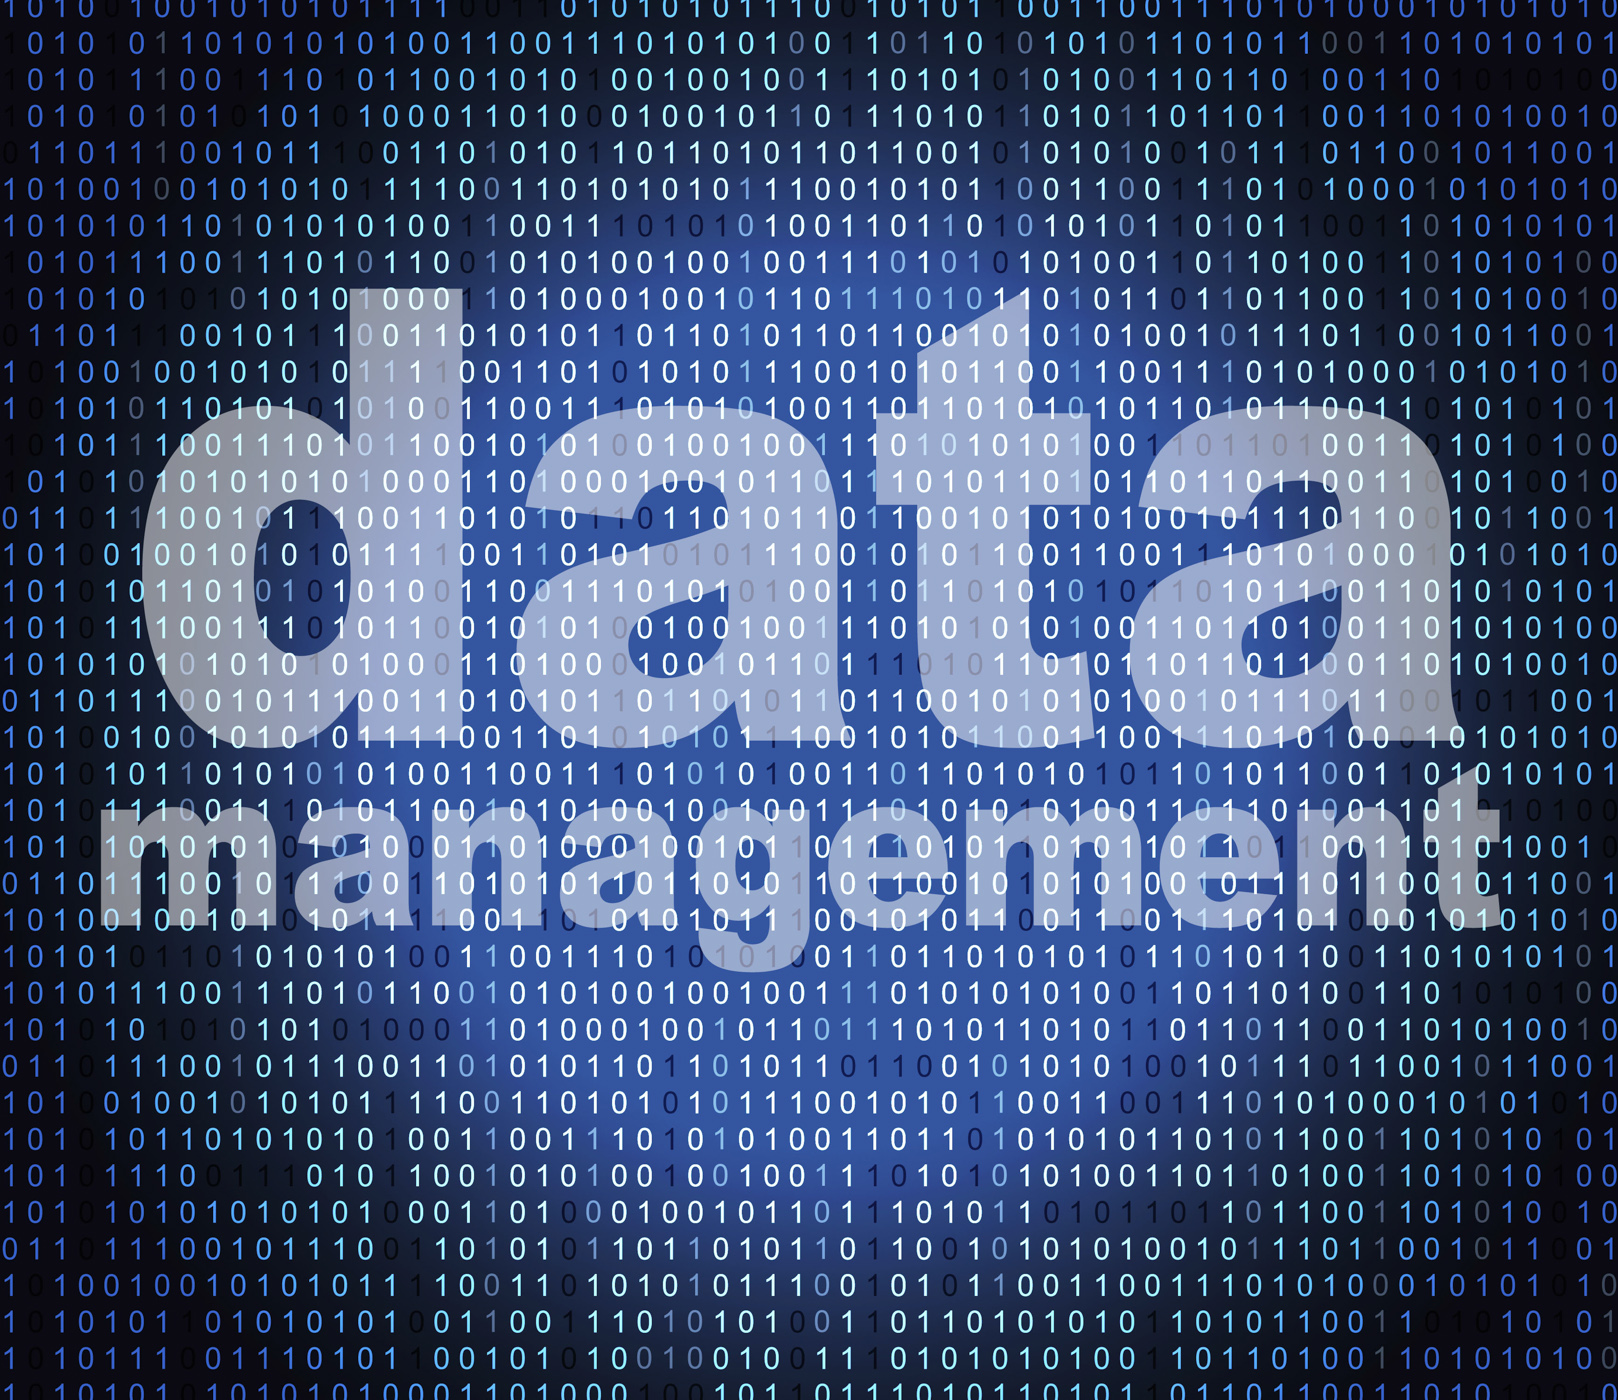 Management data means directorate organization and knowledge photo